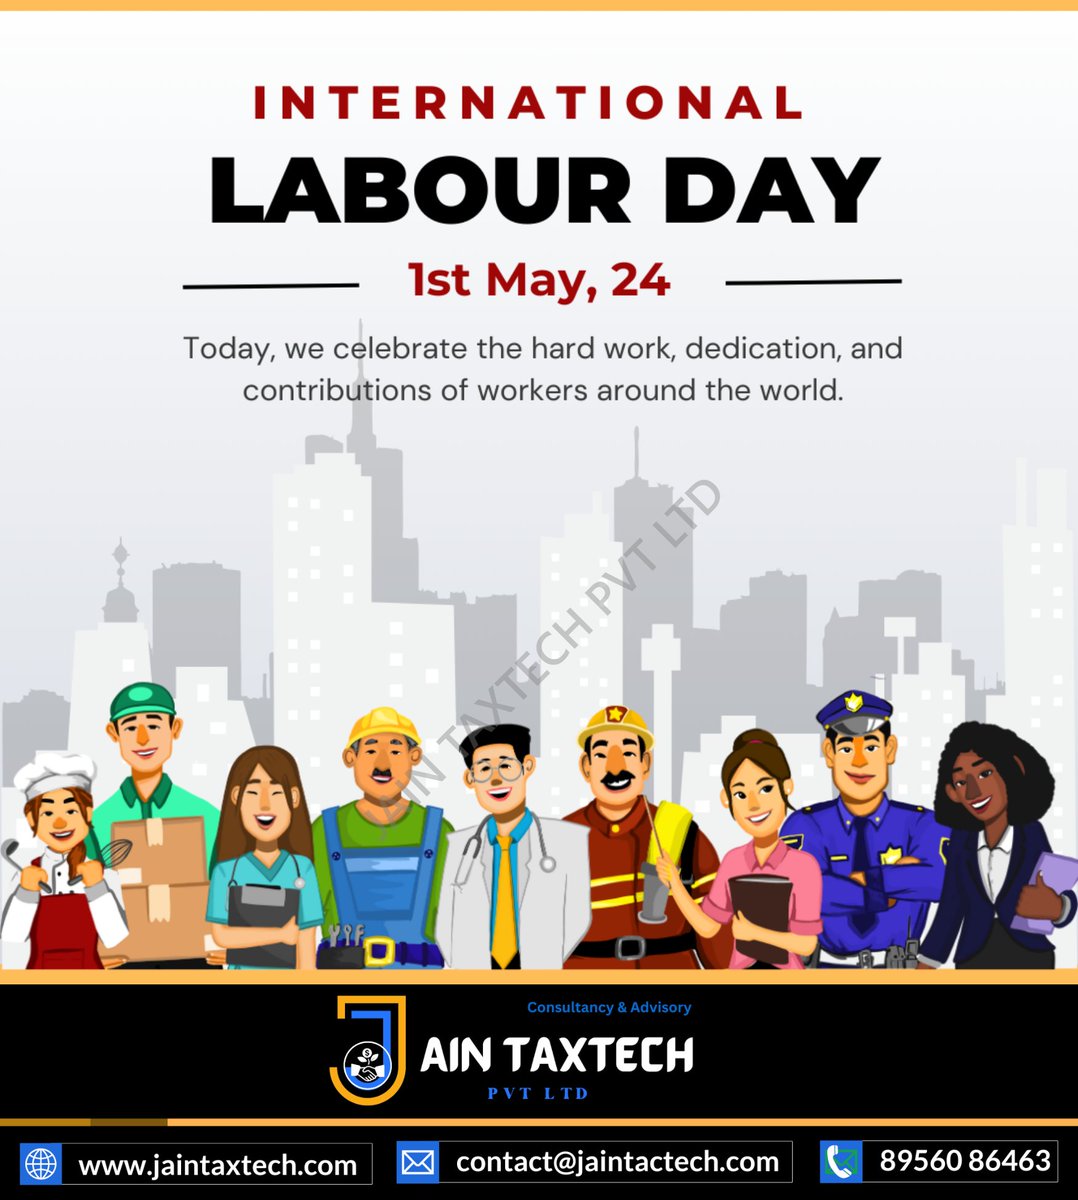 Happy International Labour Day! 🎉👷‍♂️ Celebrating the Contributions of Workers Worldwide. Jain TaxTech Stands in Solidarity with Laborers Everywhere! 💼🌐 #LabourDay #WorkersRights #JainTaxTech #Startup #BusinessOwners #OnlineAccounting #FinancialConsulting #CAConsultancy